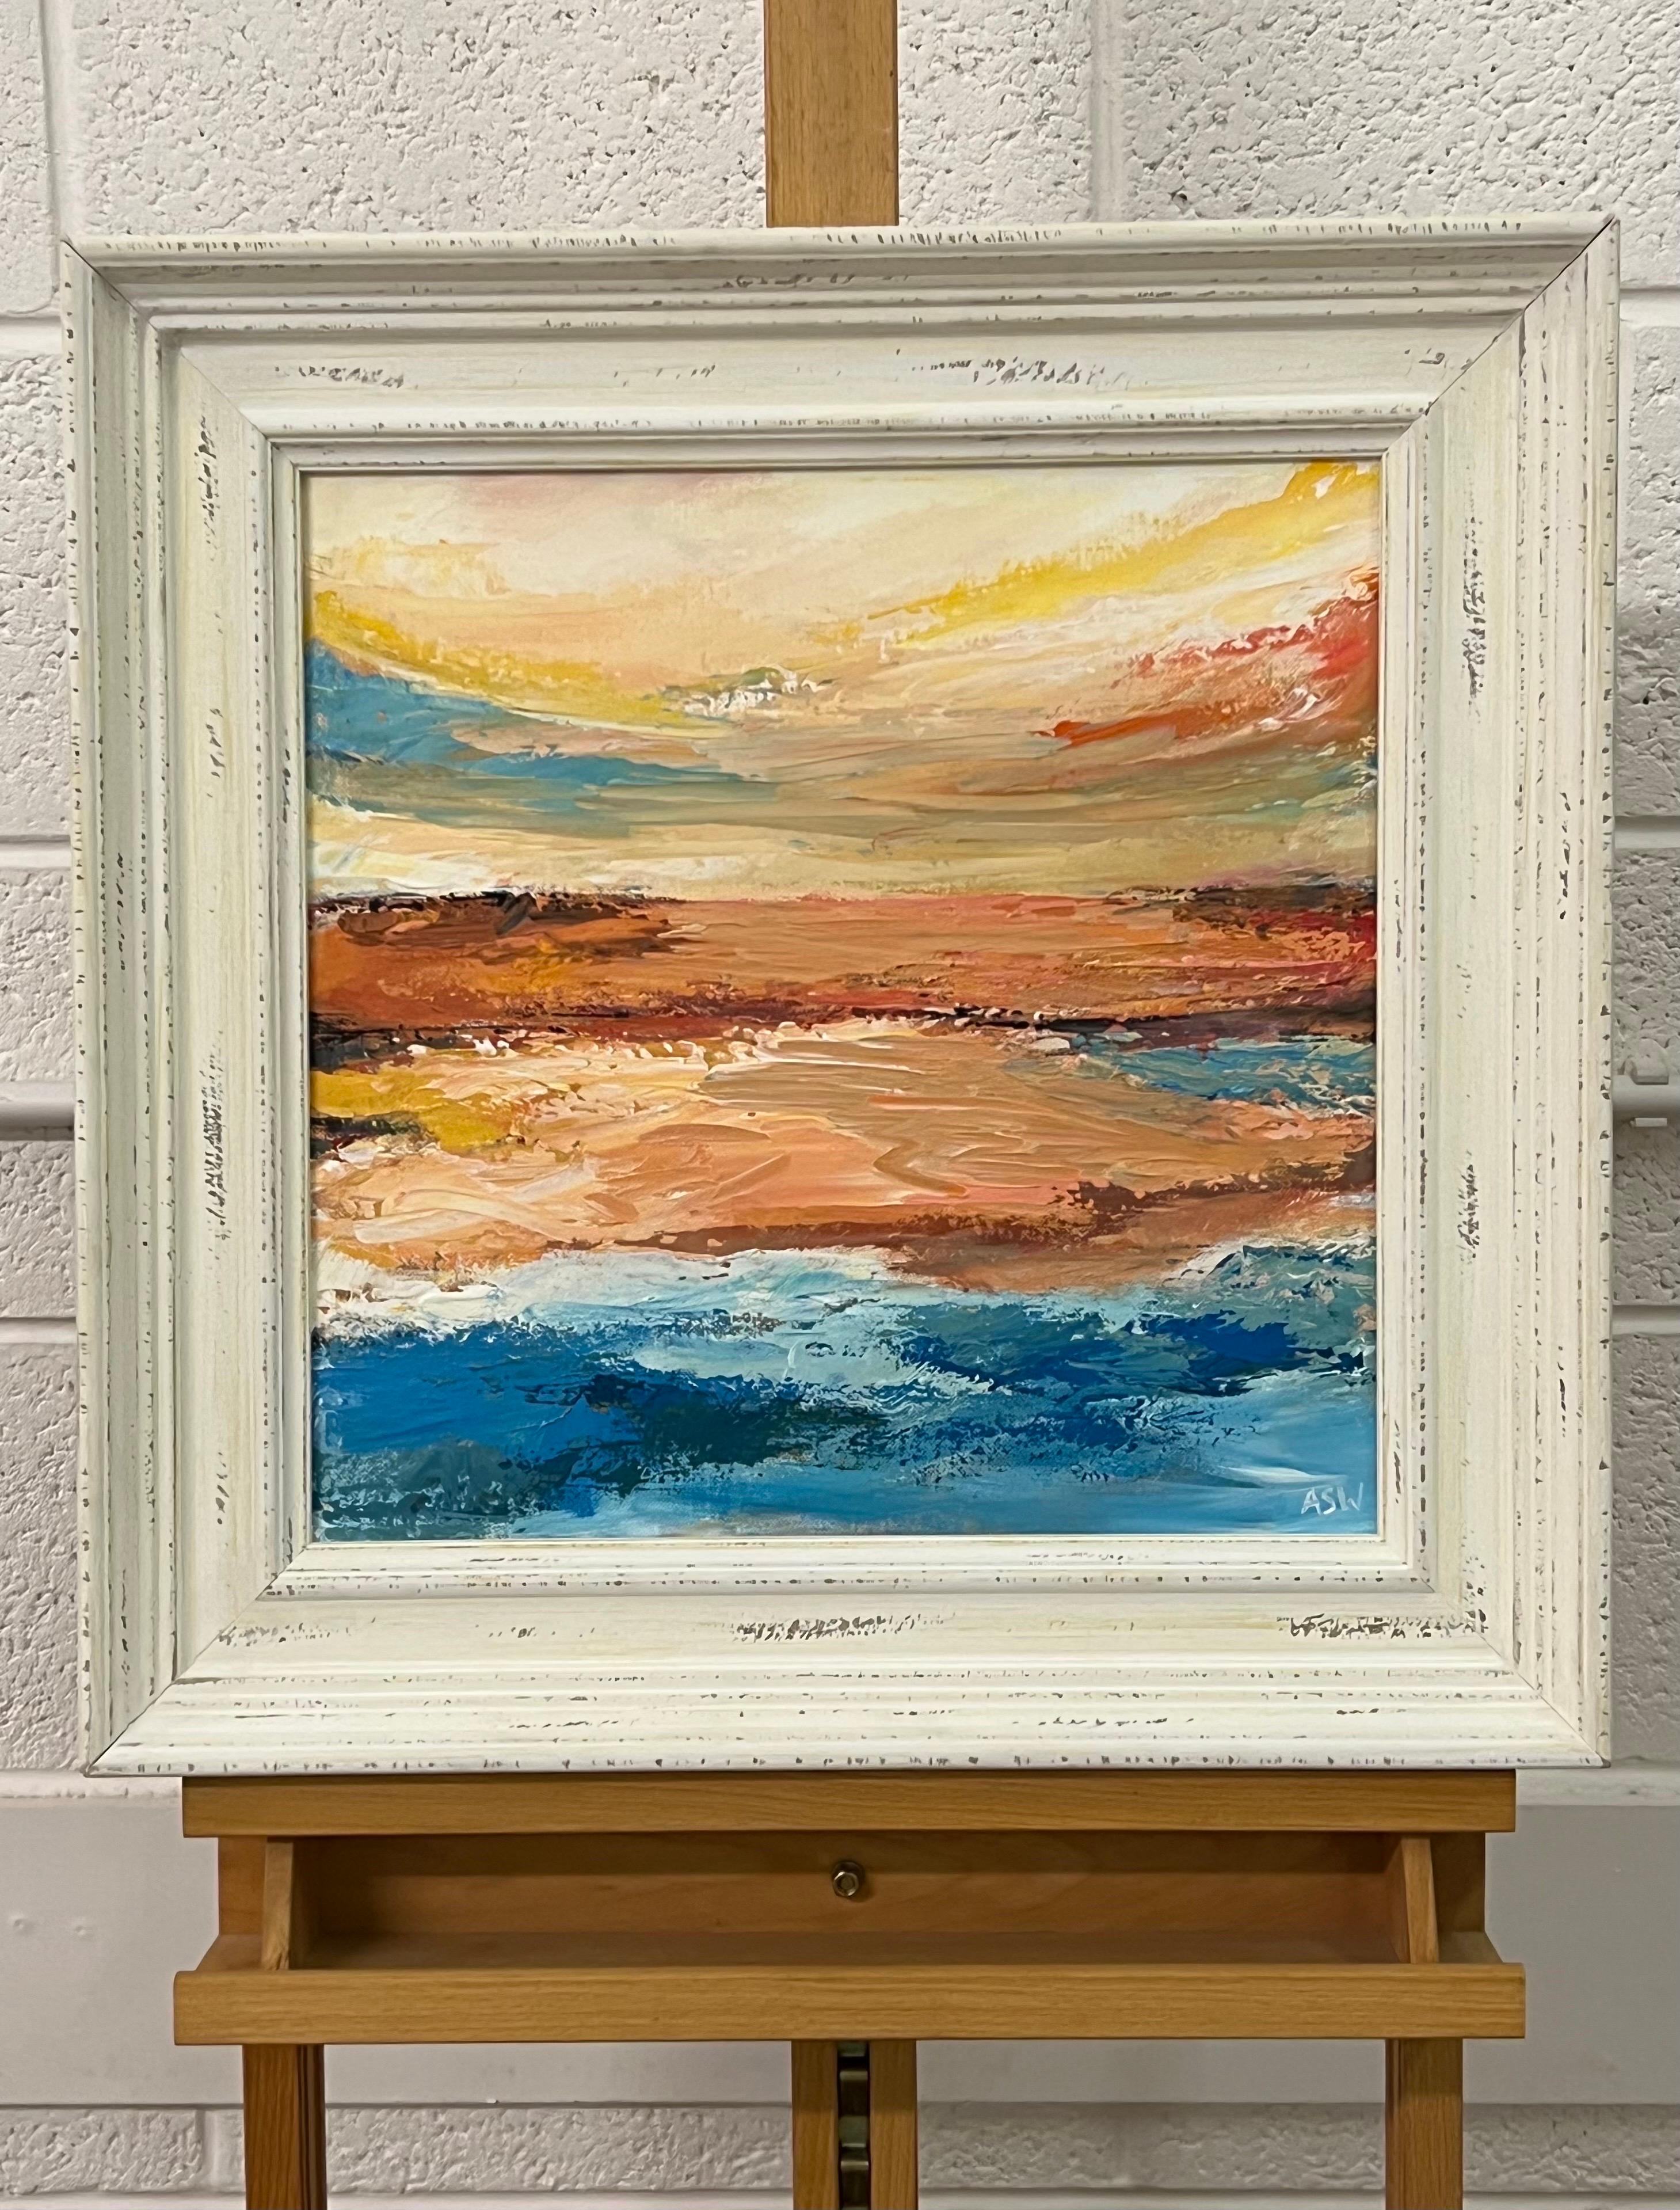 Expressive Abstract Seascape Landscape Painting by Contemporary British Artist For Sale 5